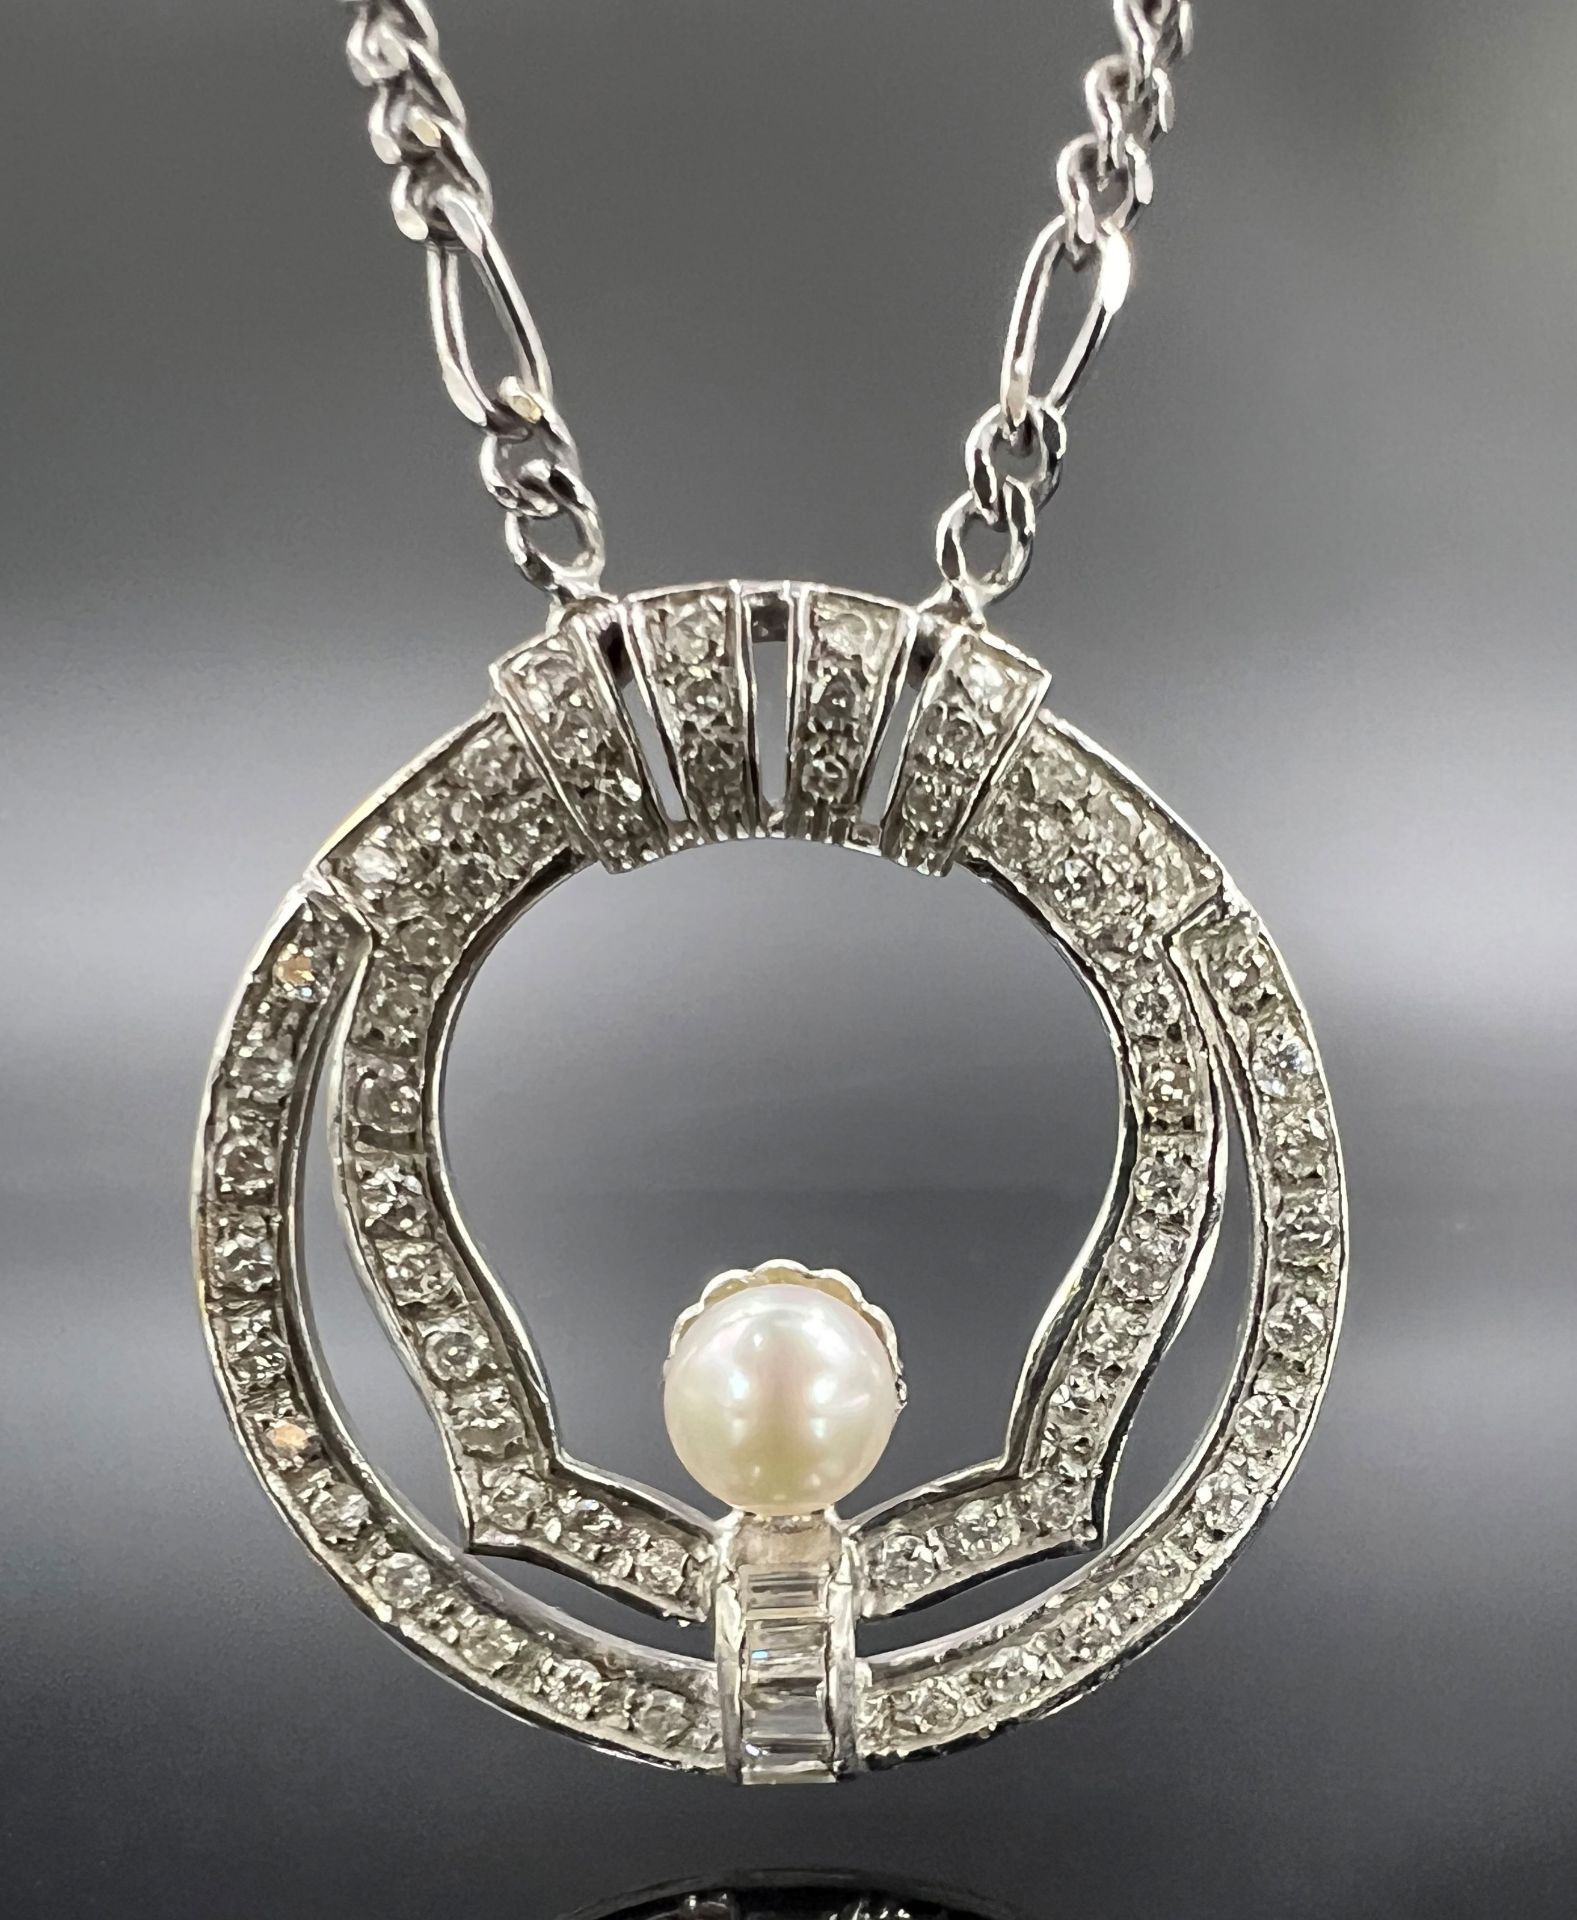 Necklace. 585 white gold with a pearl and diamonds. - Image 2 of 9